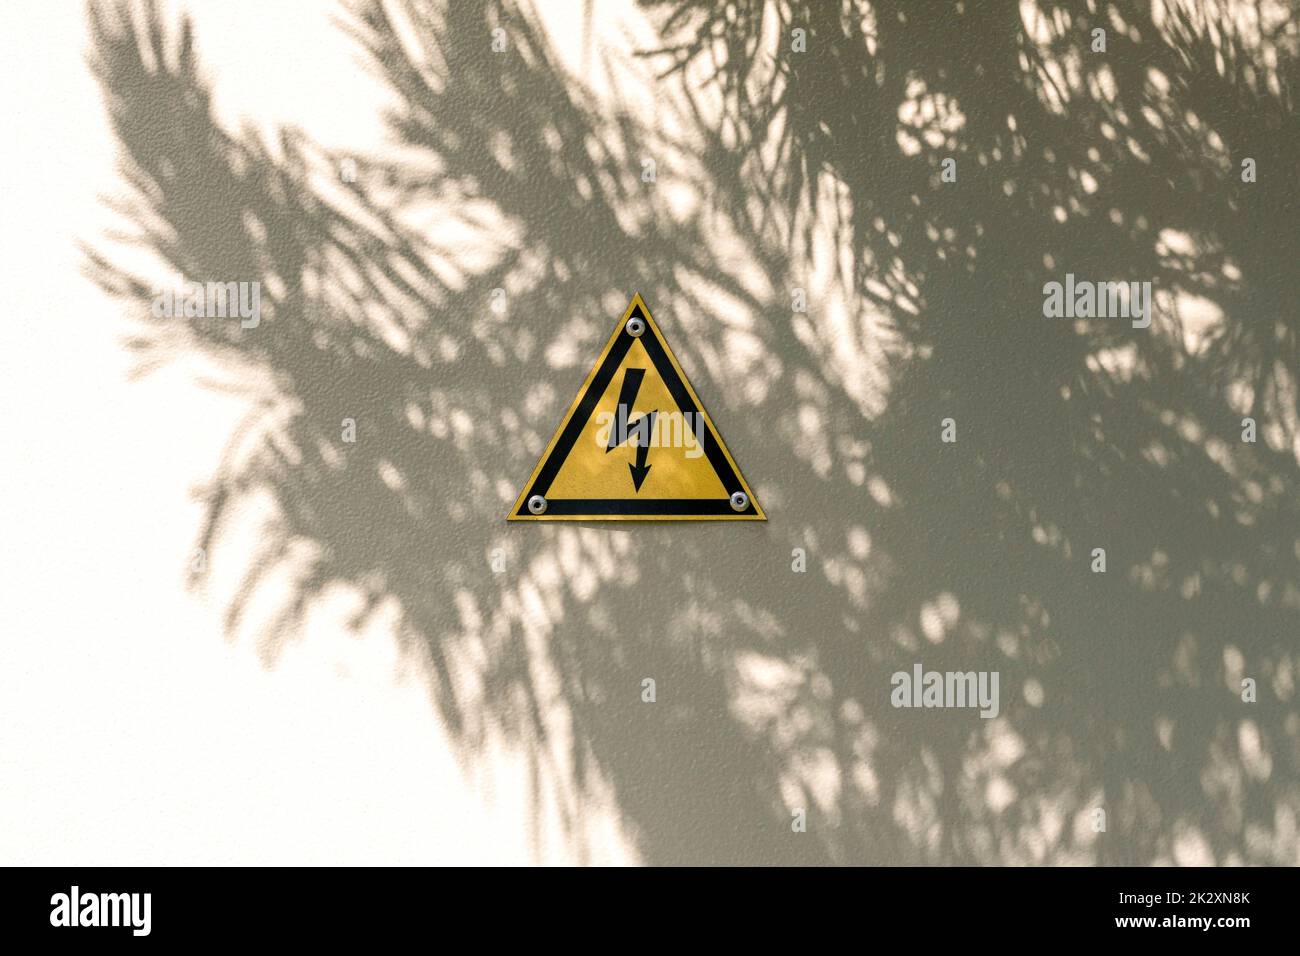 High voltage yellow triangle warning sign on gray metal doors with tree shadow Stock Photo